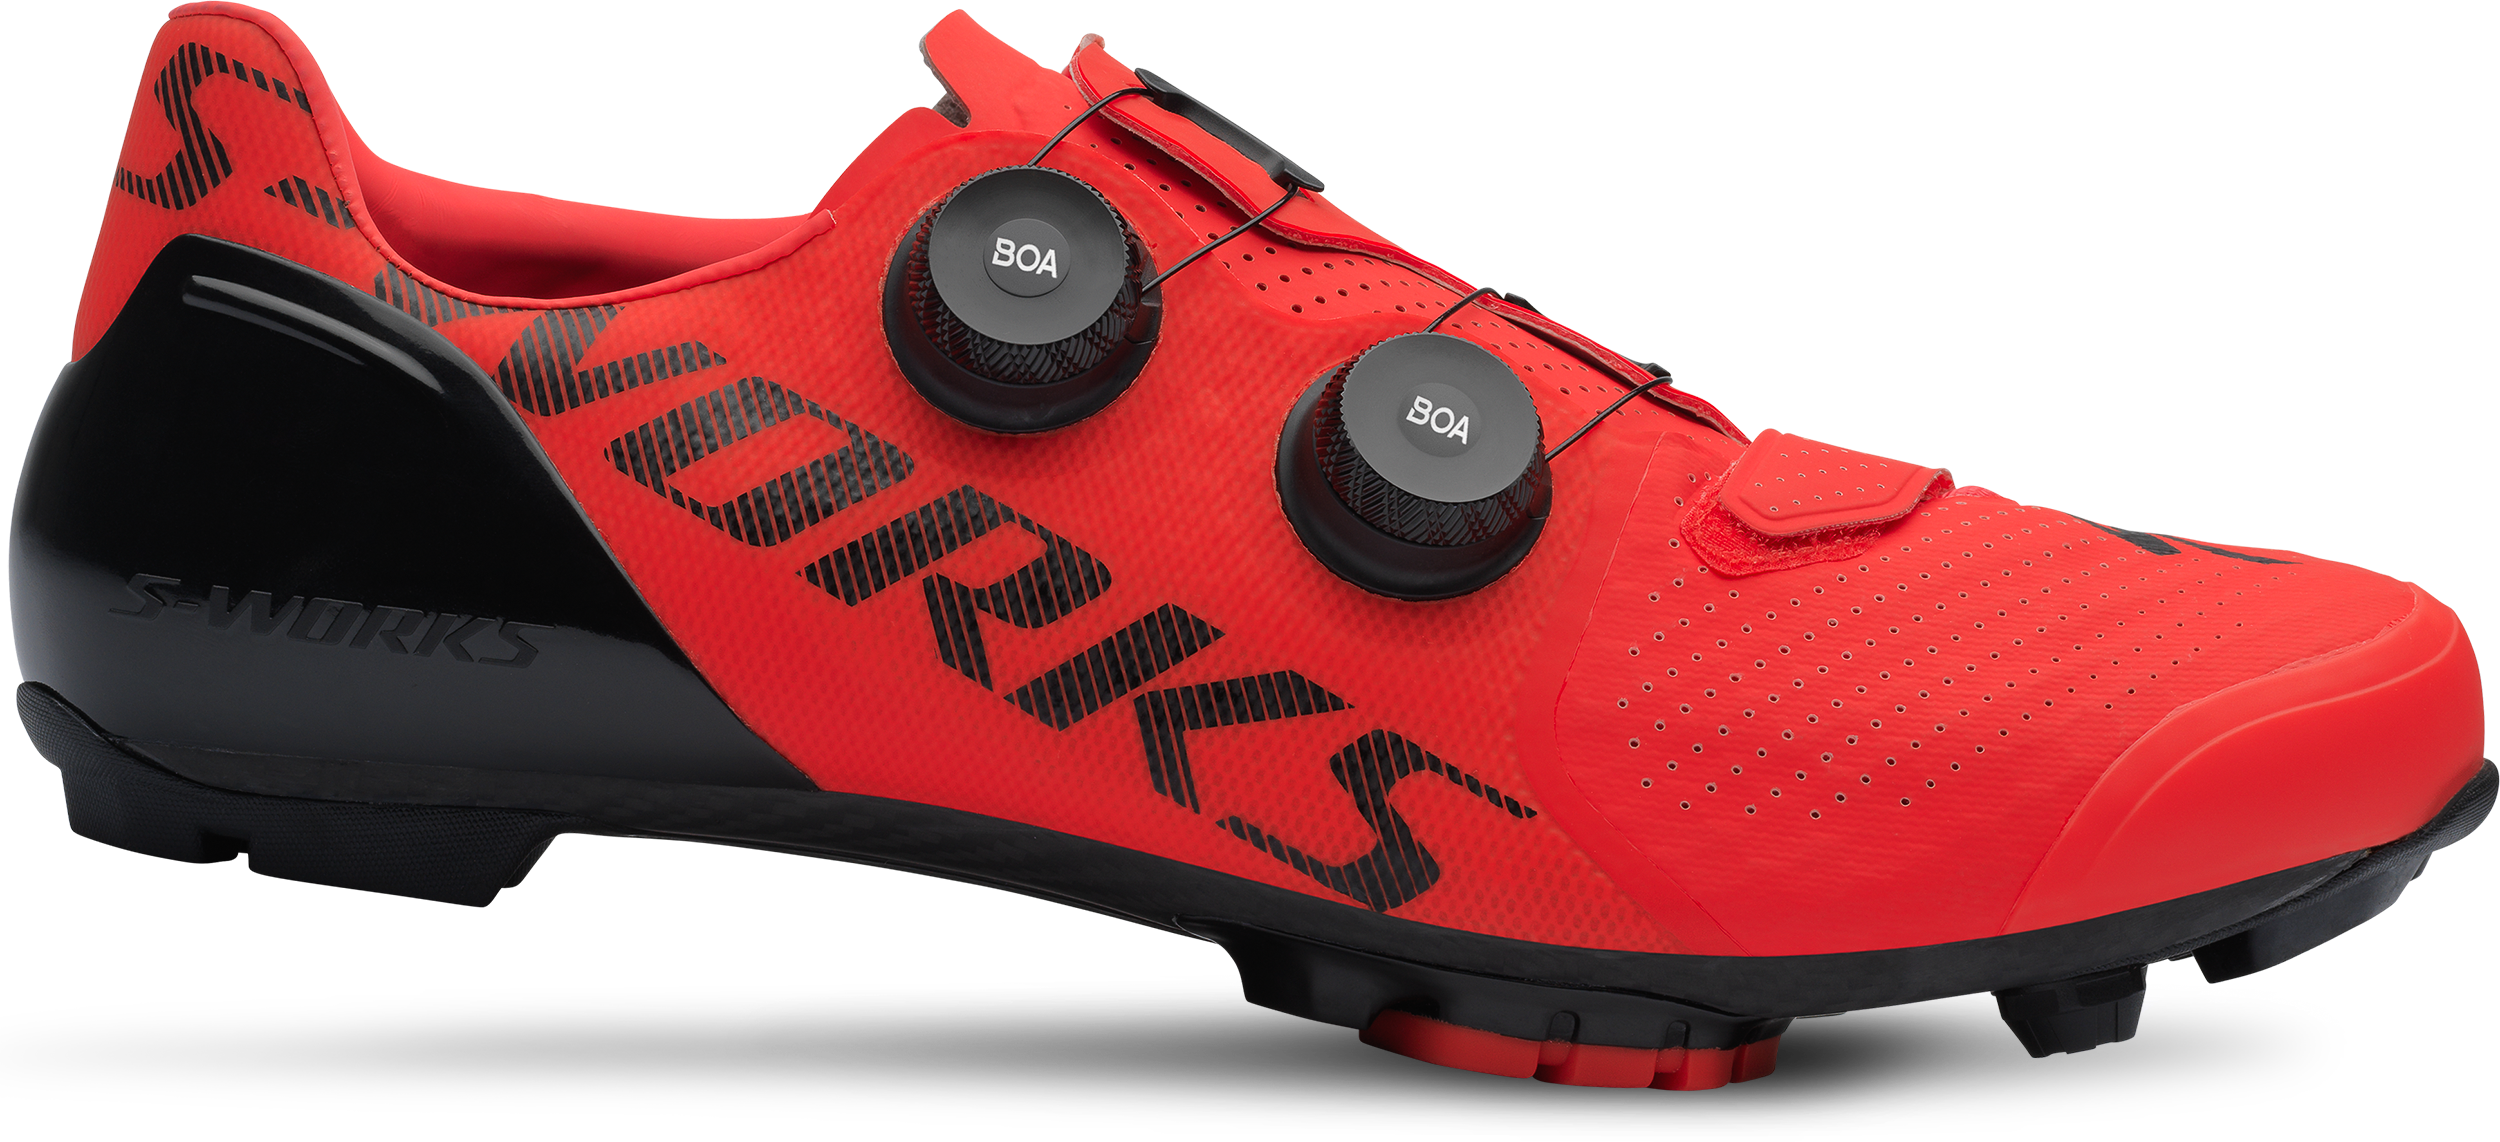 S-Works Recon Mountain Bike Shoes | Specialized.com